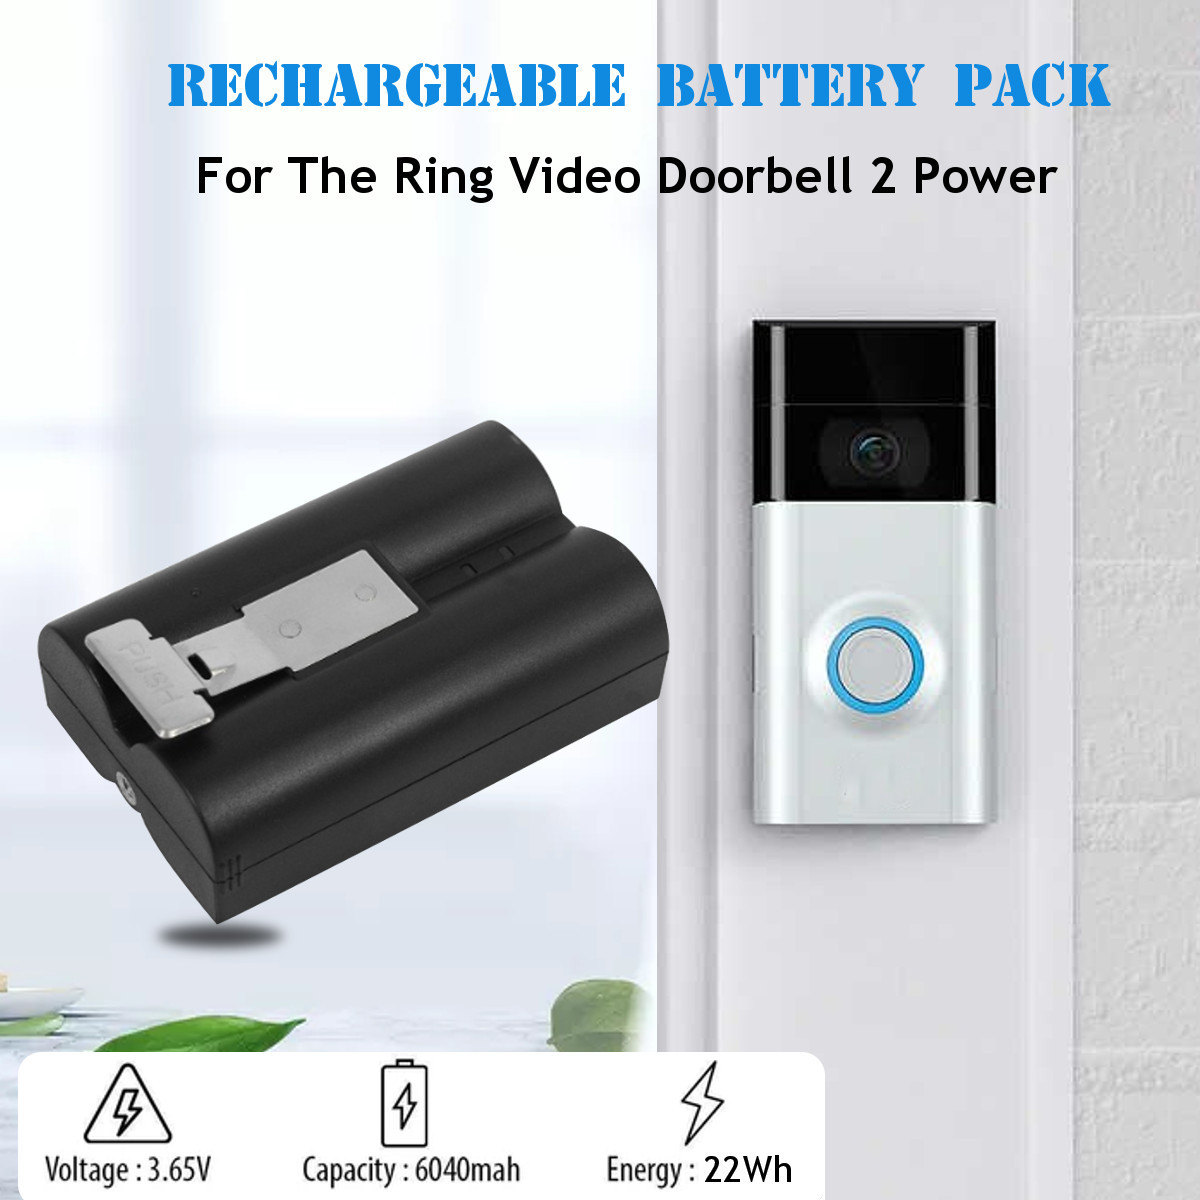 Rechargeable-Battery-Pack-For-The-Ring-Video-Doorbell-2-Power-1632293-2